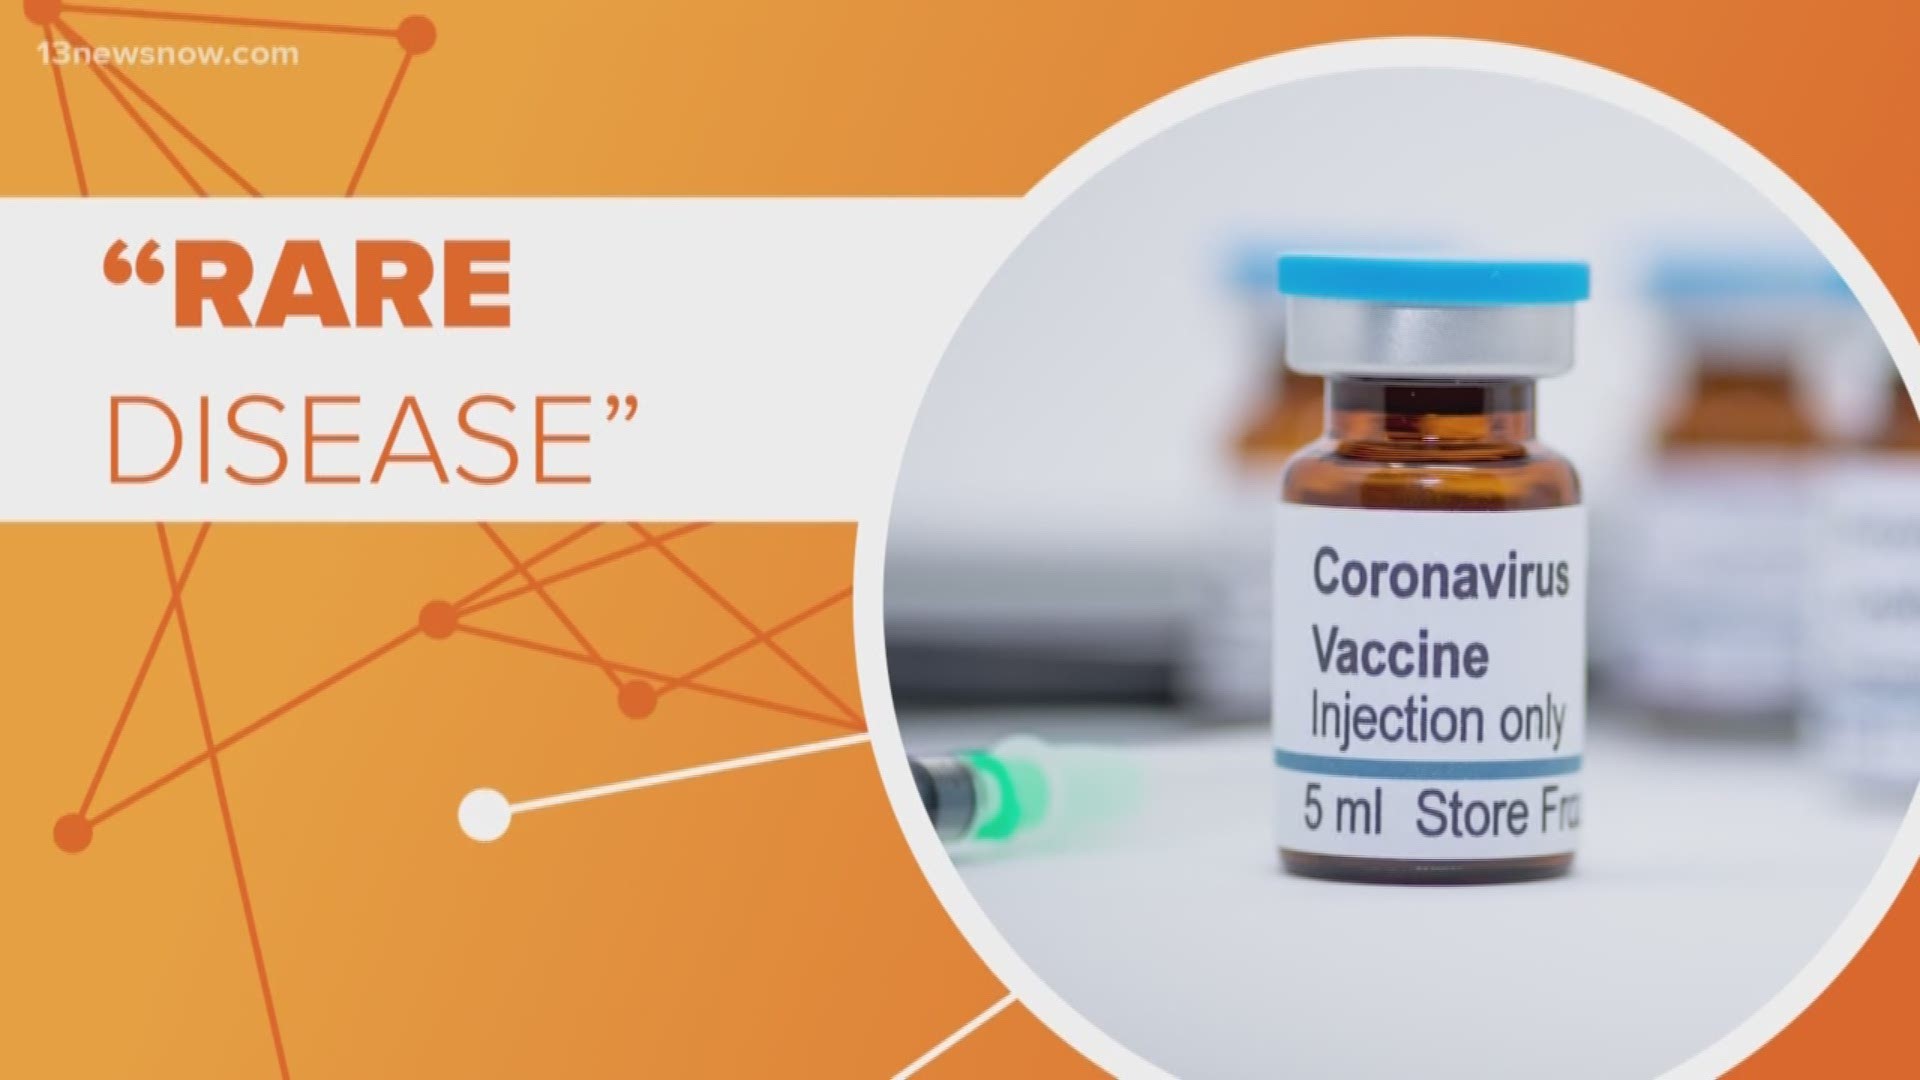 Connect the Dots: Potential coronavirus treatment gets FDA's orphan drug label.